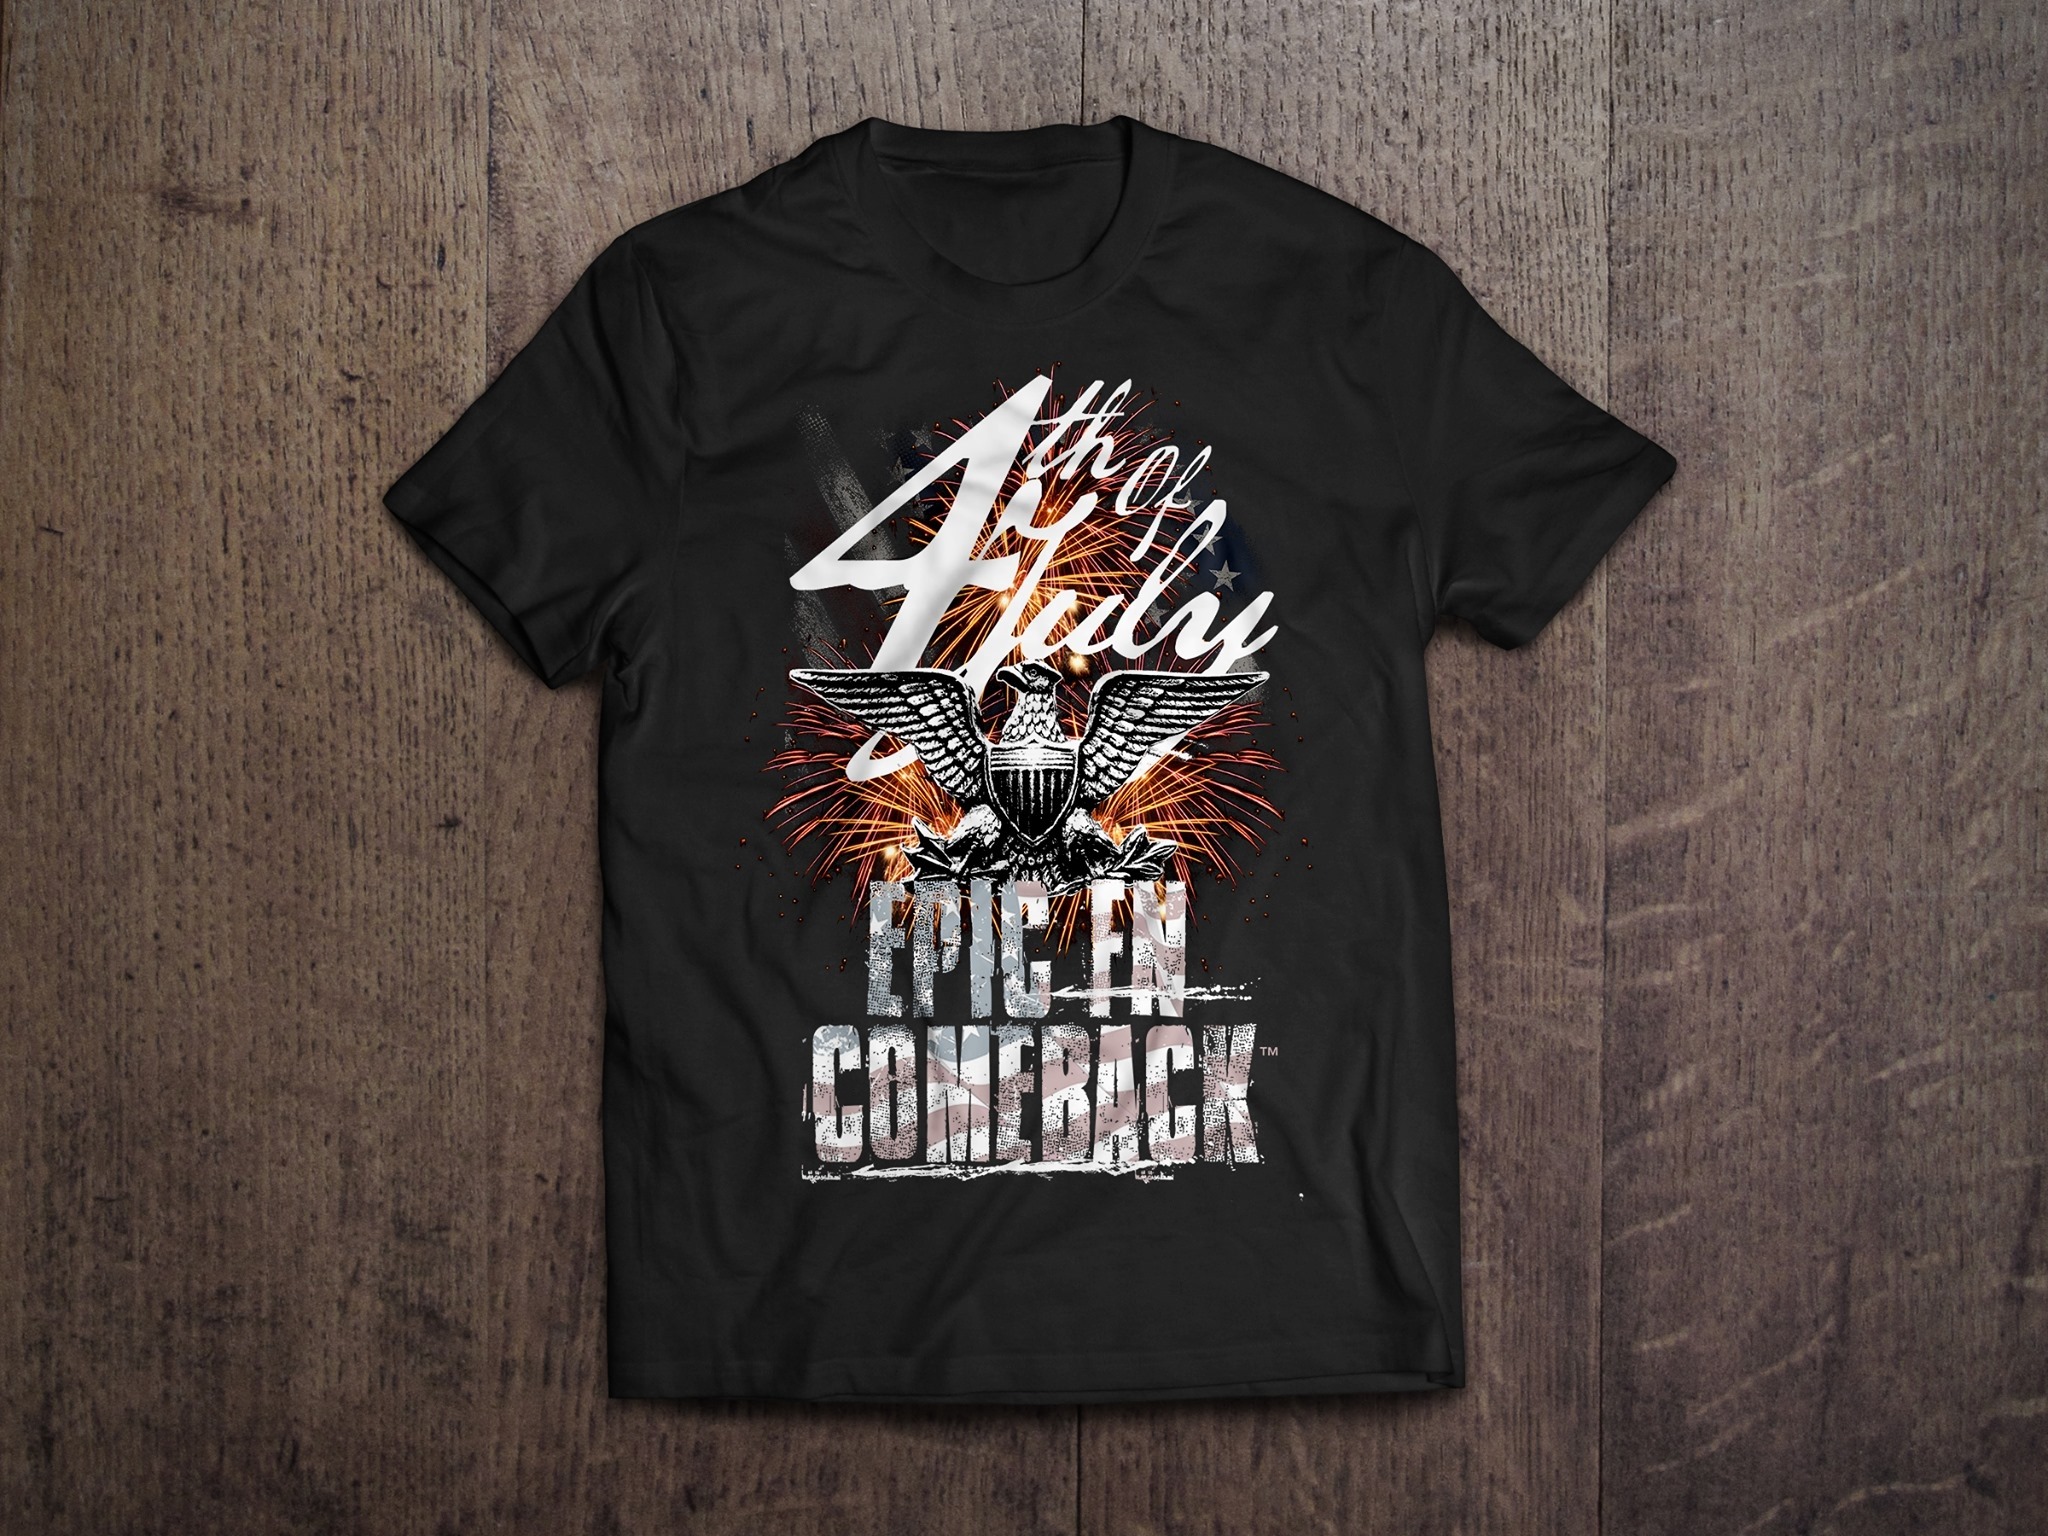 a black t - shirt with a motorcycle design on it.